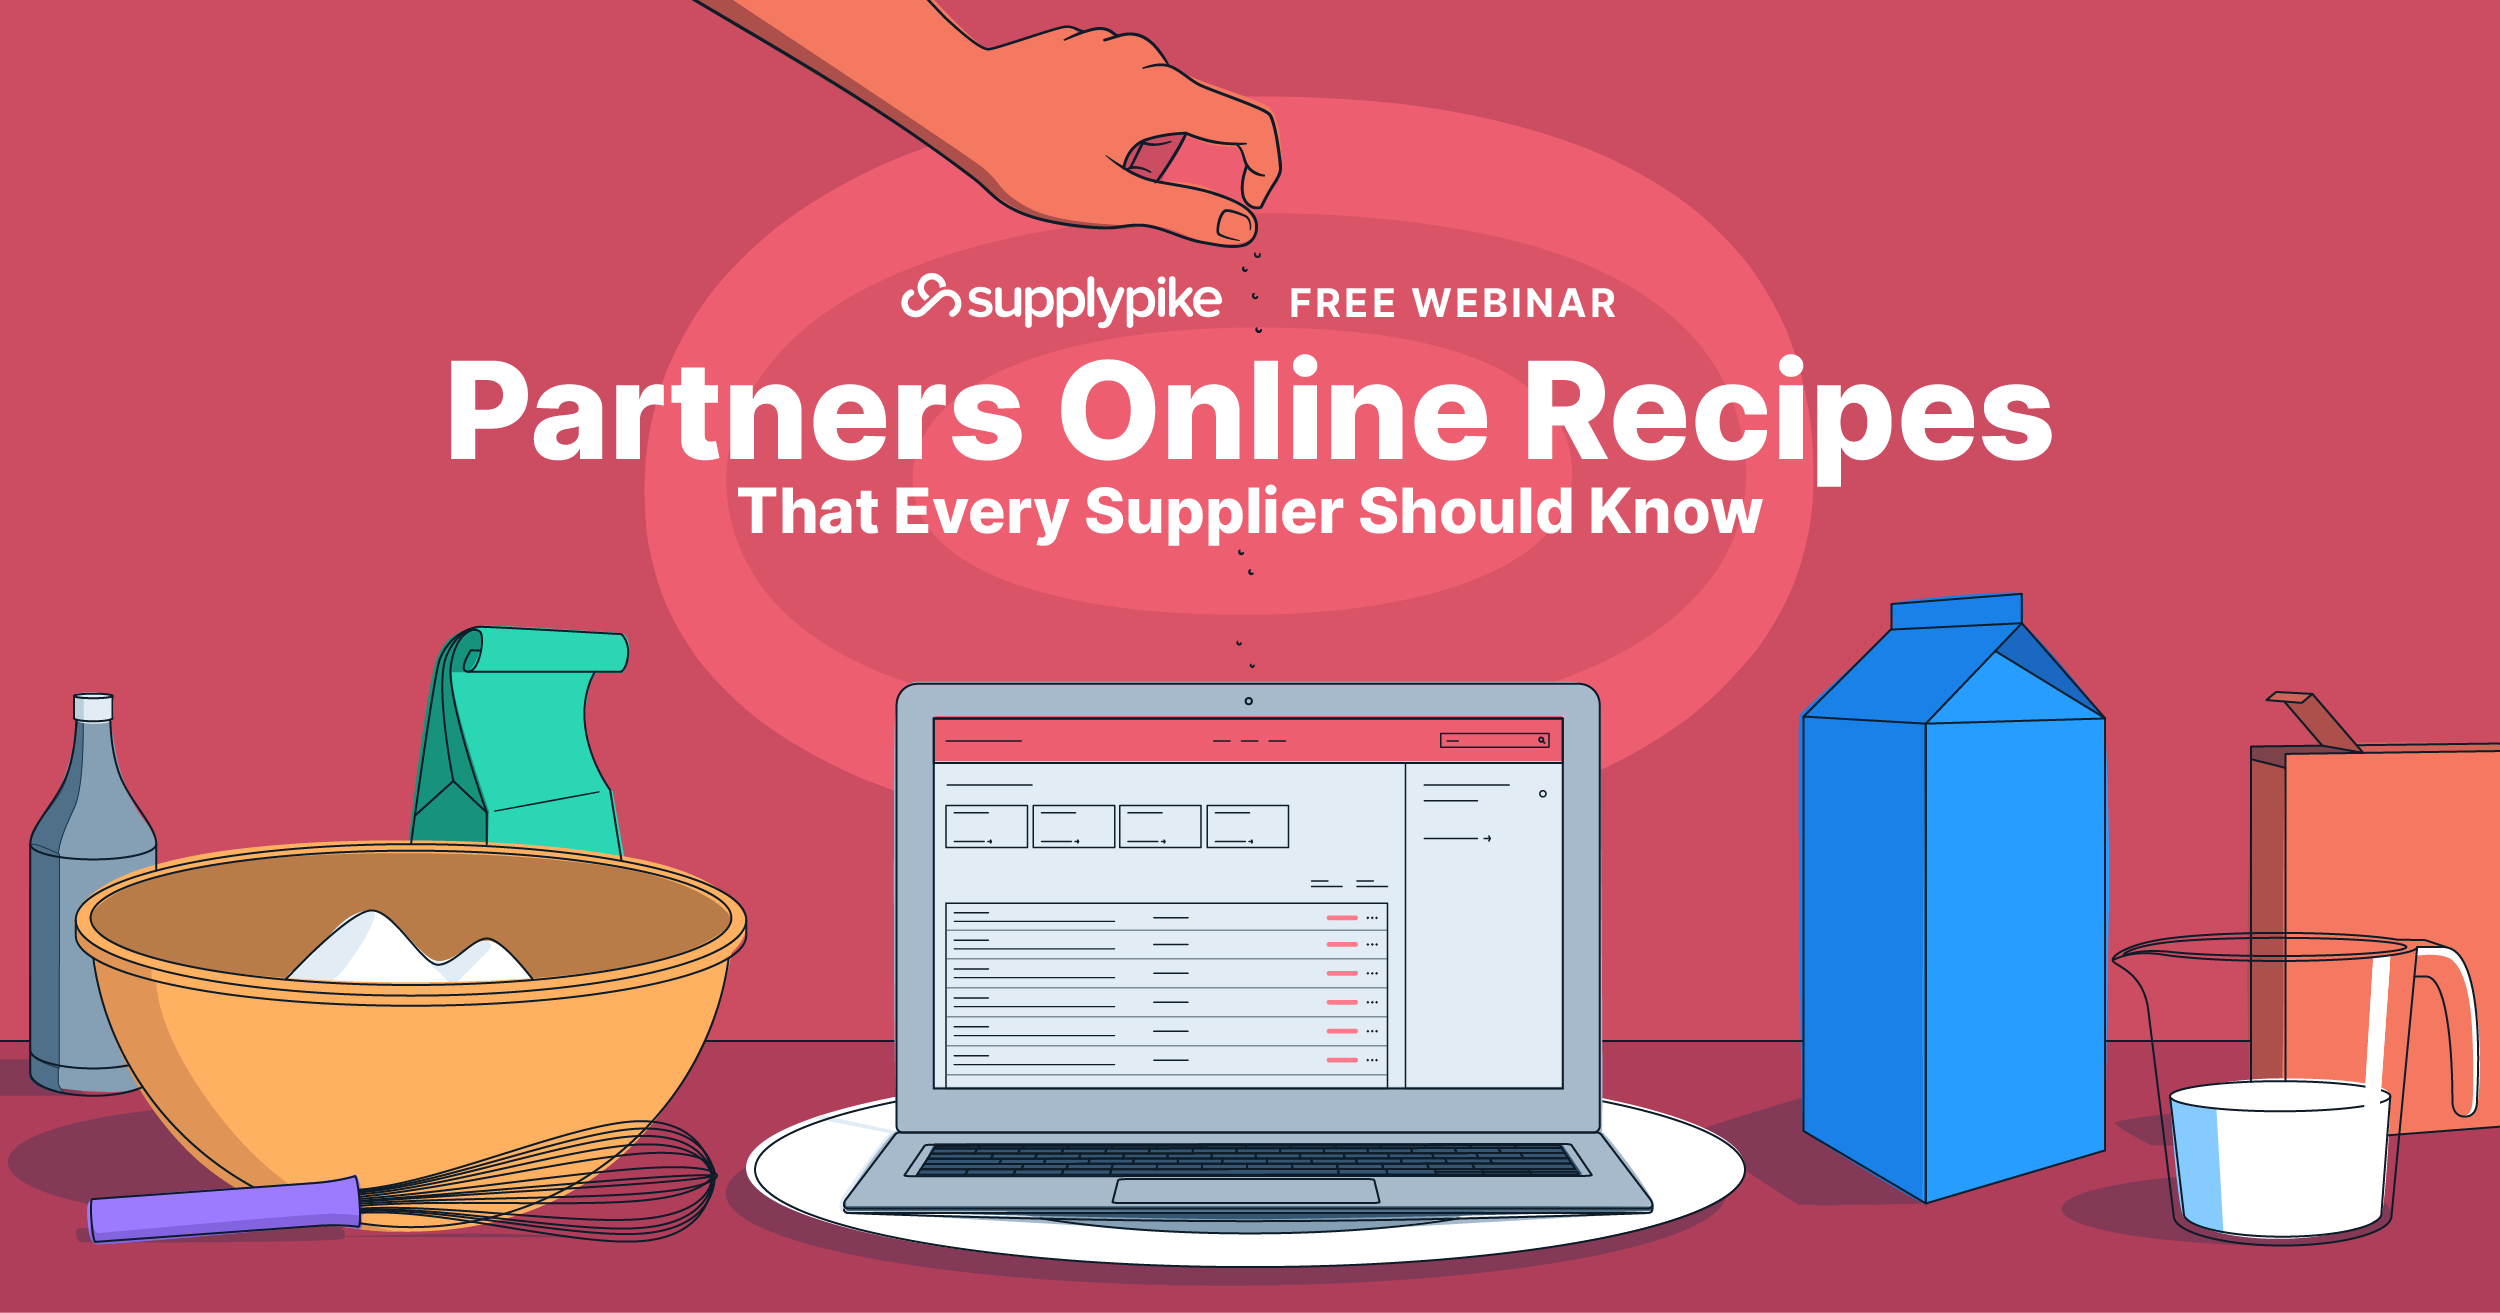 Partners Online Recipes That Every Supplier Should Know